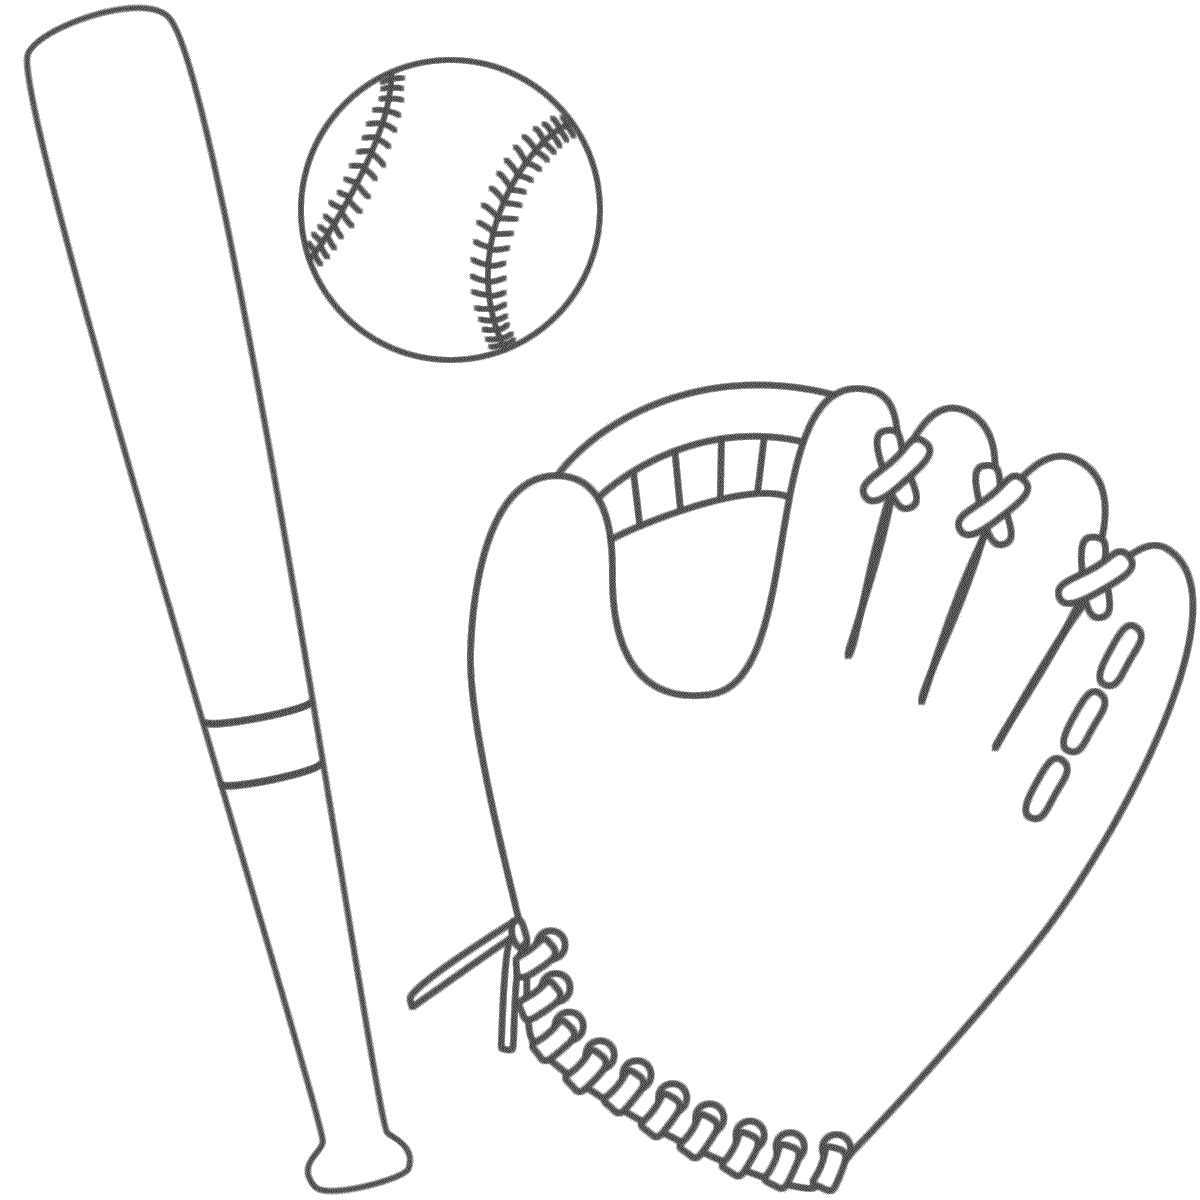 Bat, Glove, and Ball coloring page | Paint it! | Pinterest ...